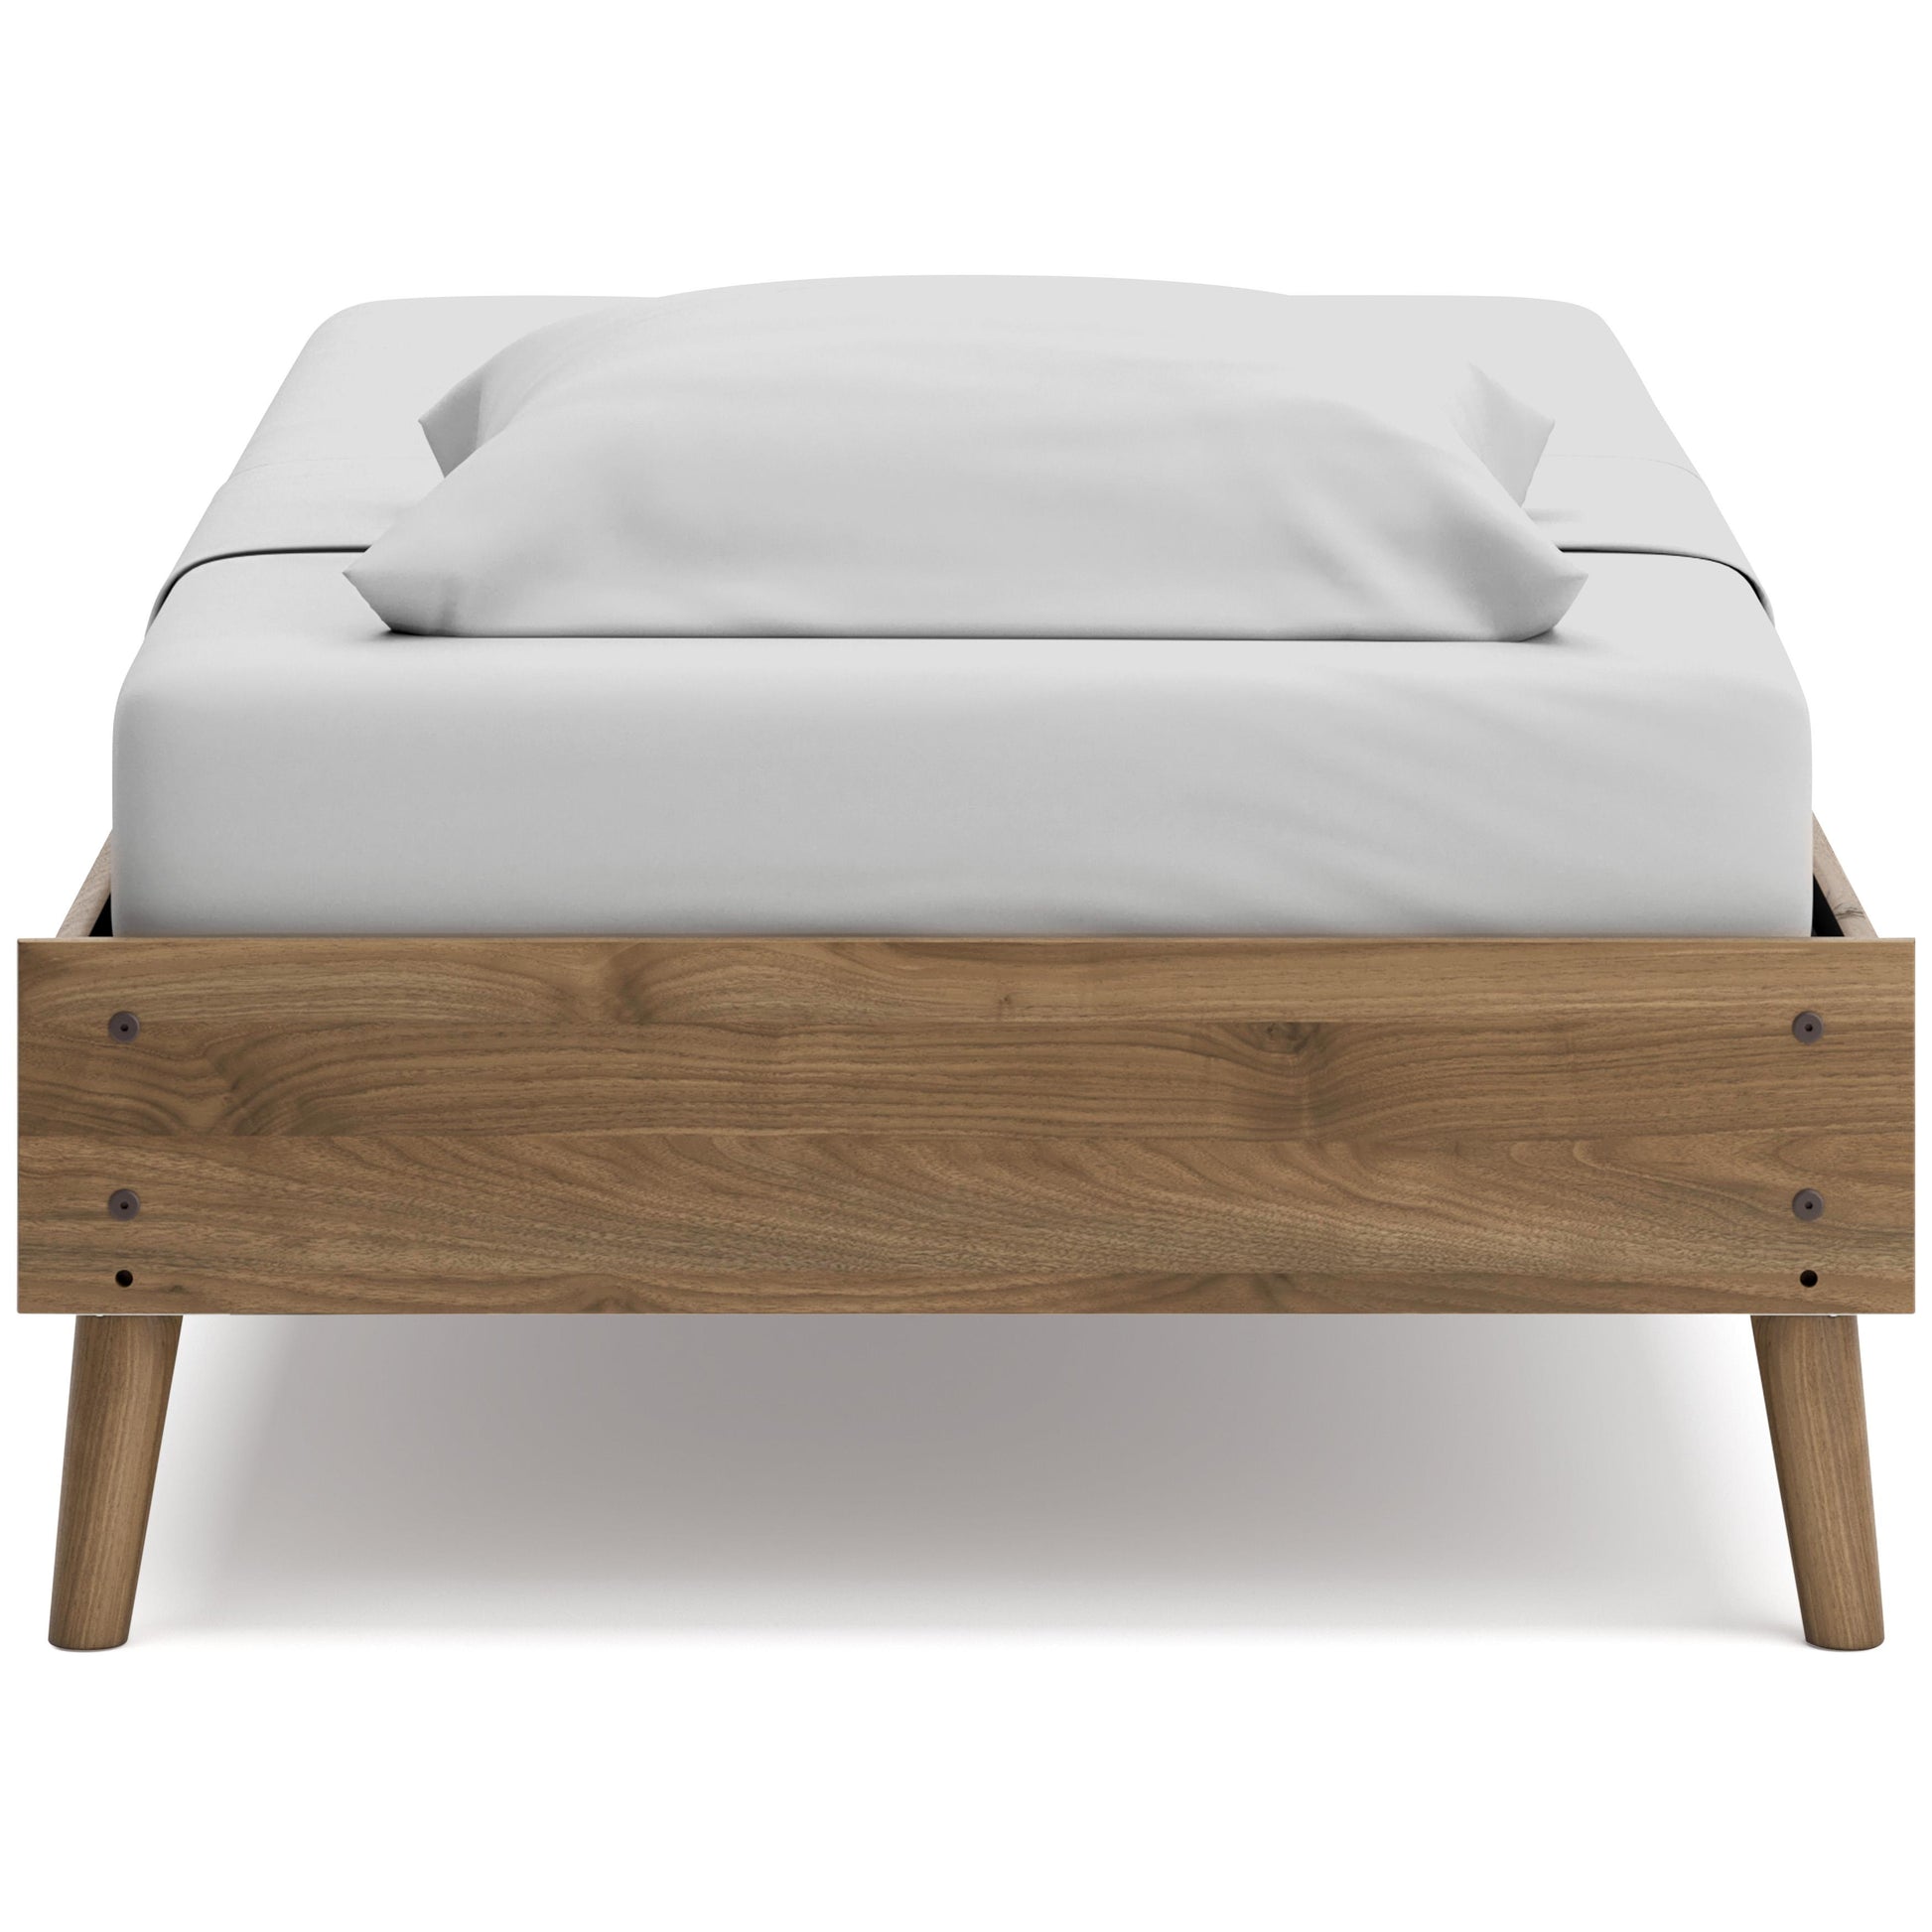 Signature Design by Ashley Kids Beds Bed EB1187-111 IMAGE 4